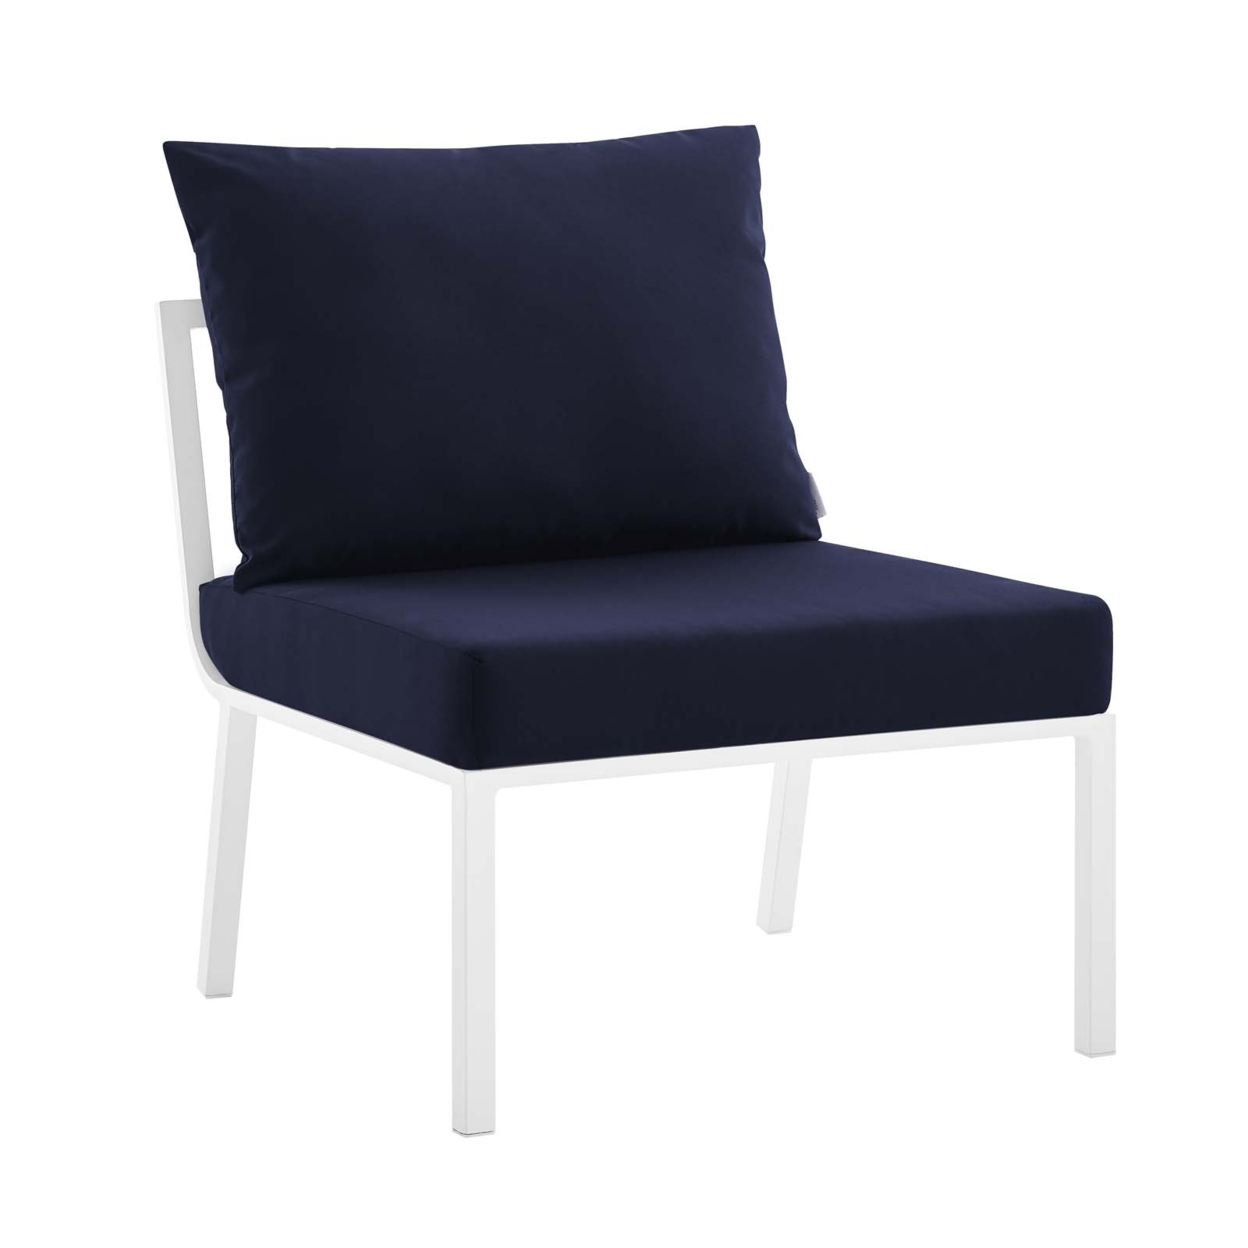 Riverside Outdoor Patio Aluminum Armless Chair,White Navy